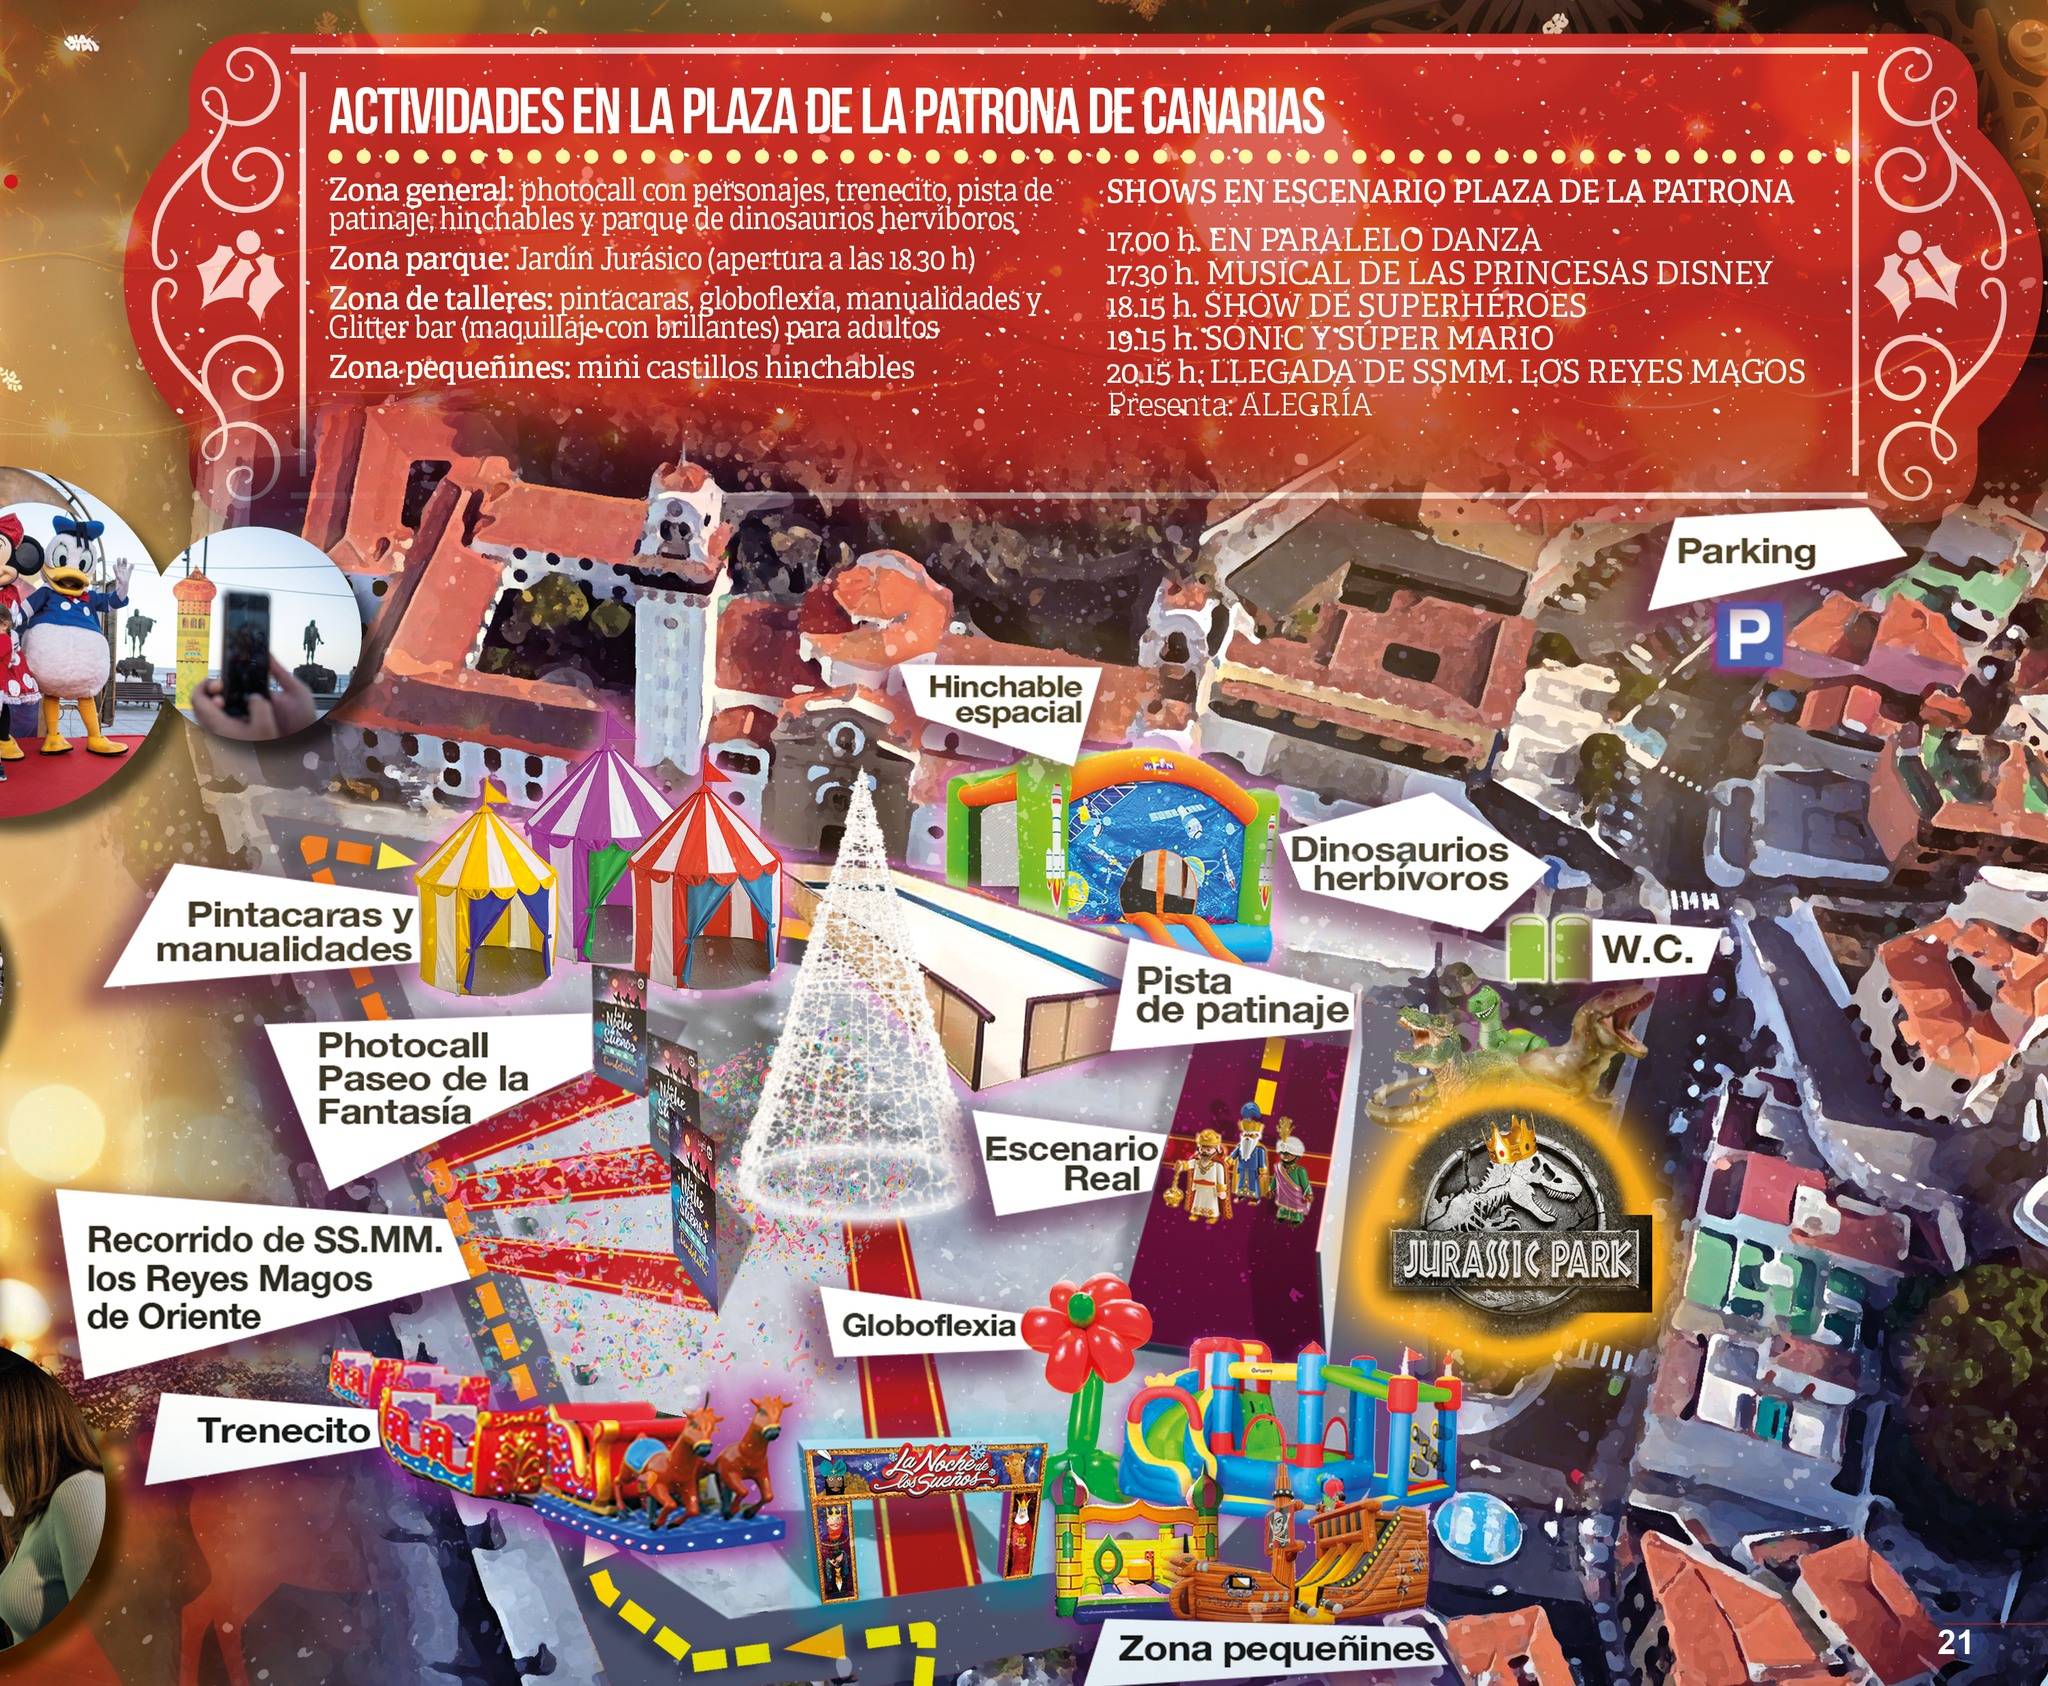 Christmas events for the family in Tenerife